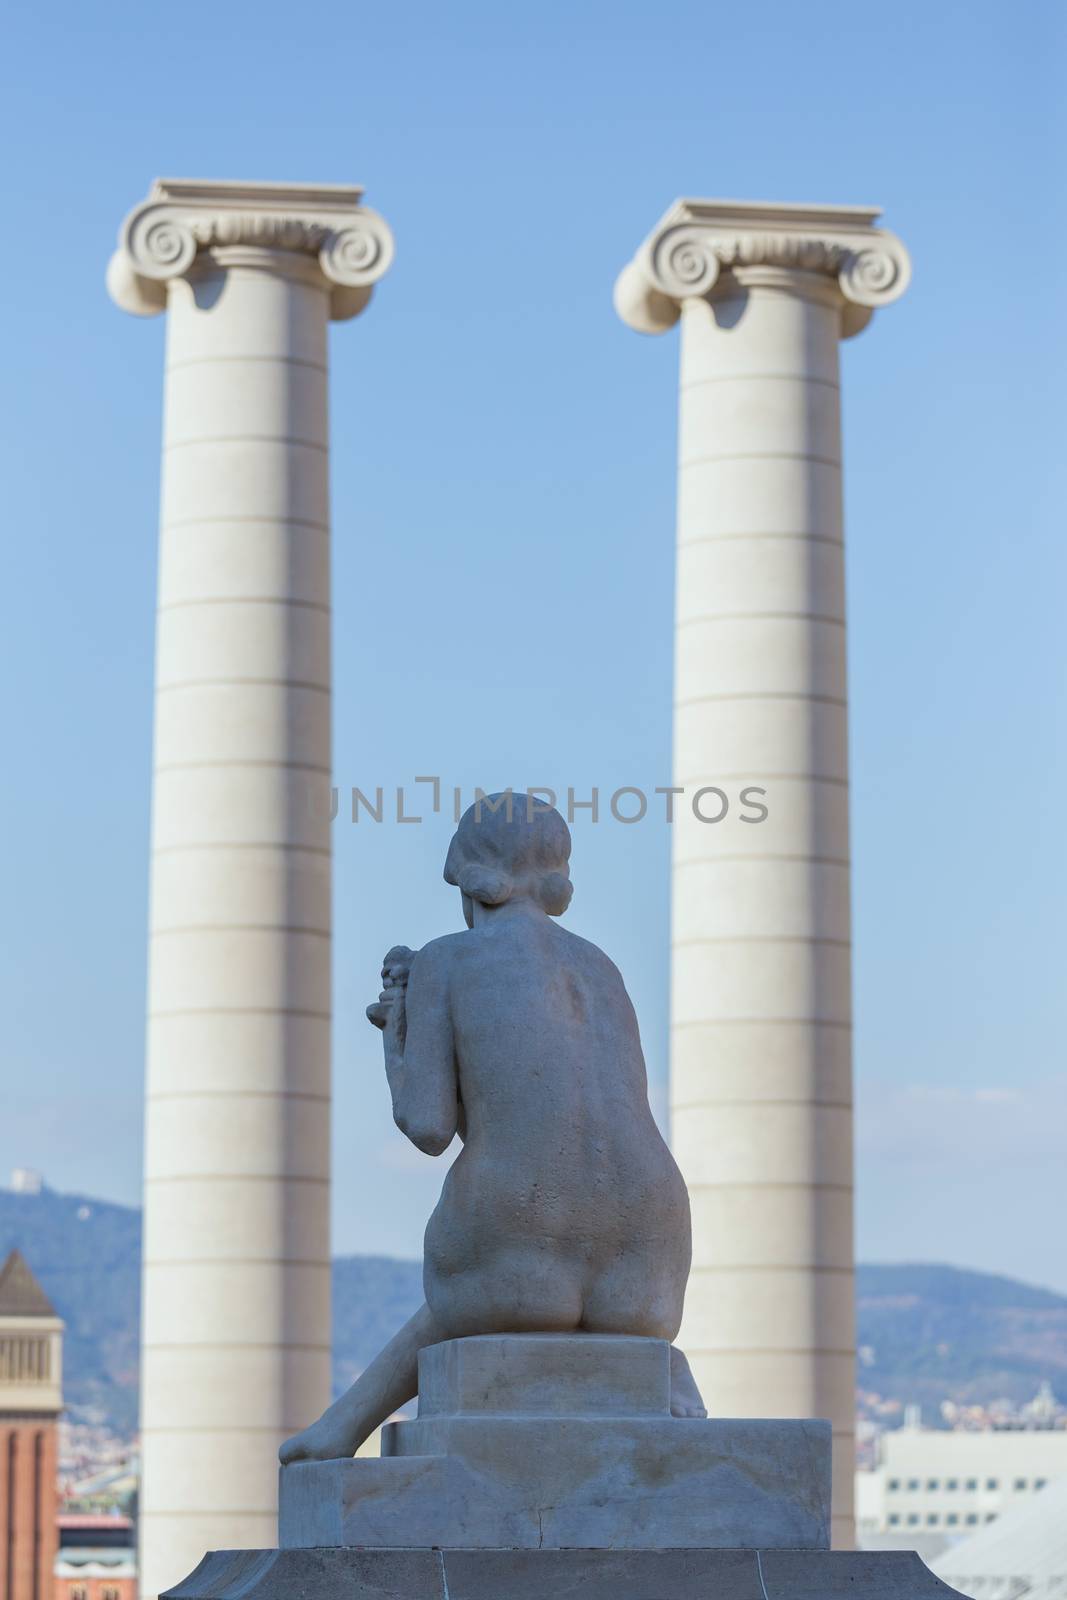 Female statue from the back and The Four Columns ("Les Quatre Columnes" in Catalan), Montjuic Barcelona, Catalunya/Spain ,01 november 2016